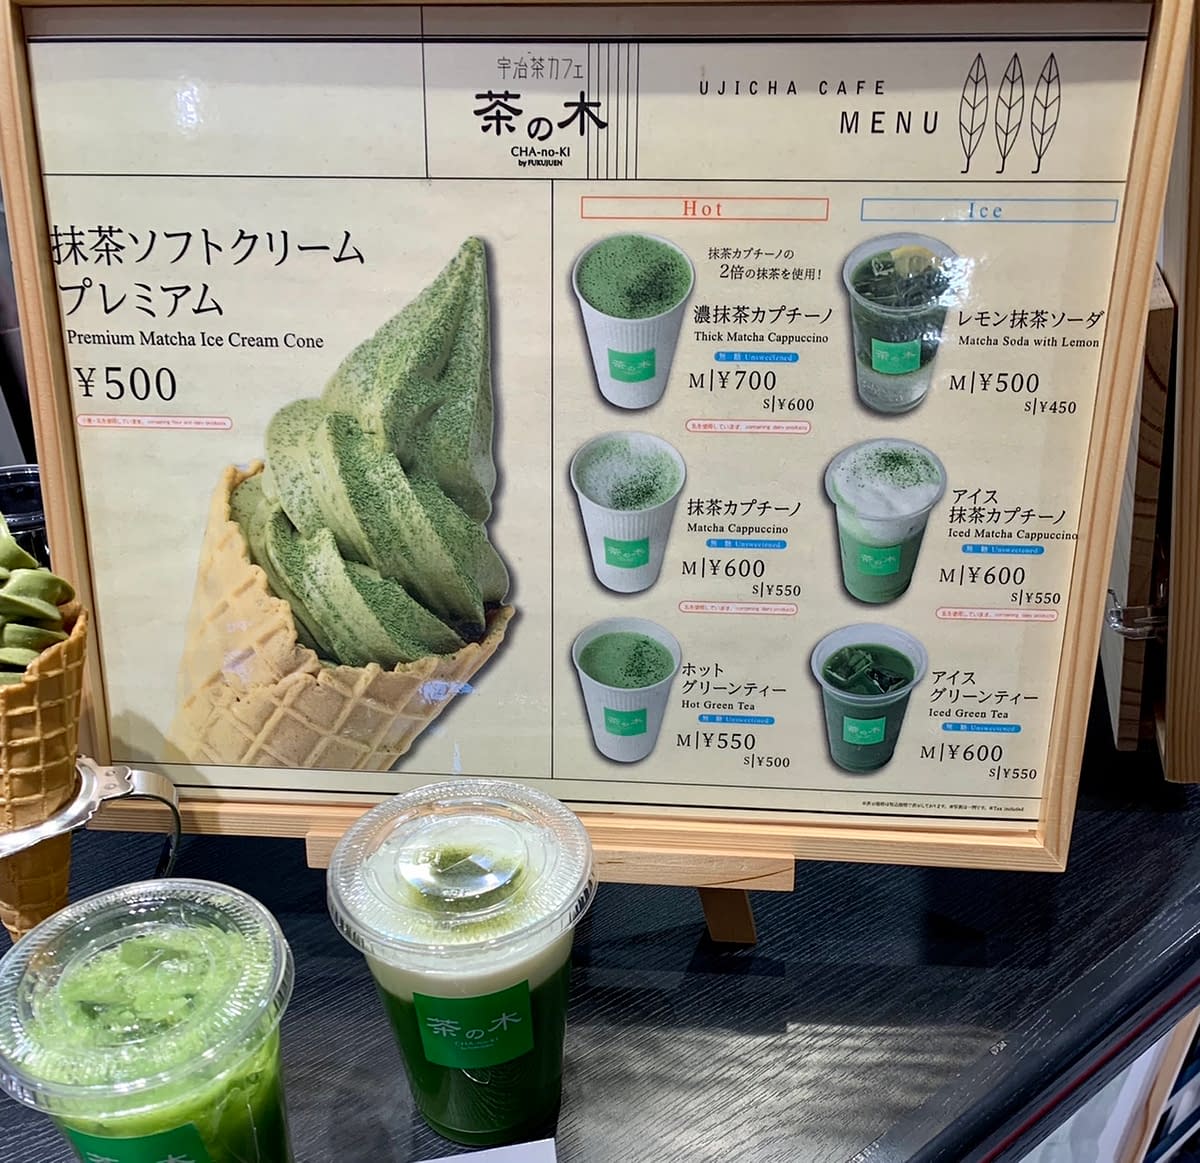 A sign advertising green tea ice cream and various green tea drinks in Japan